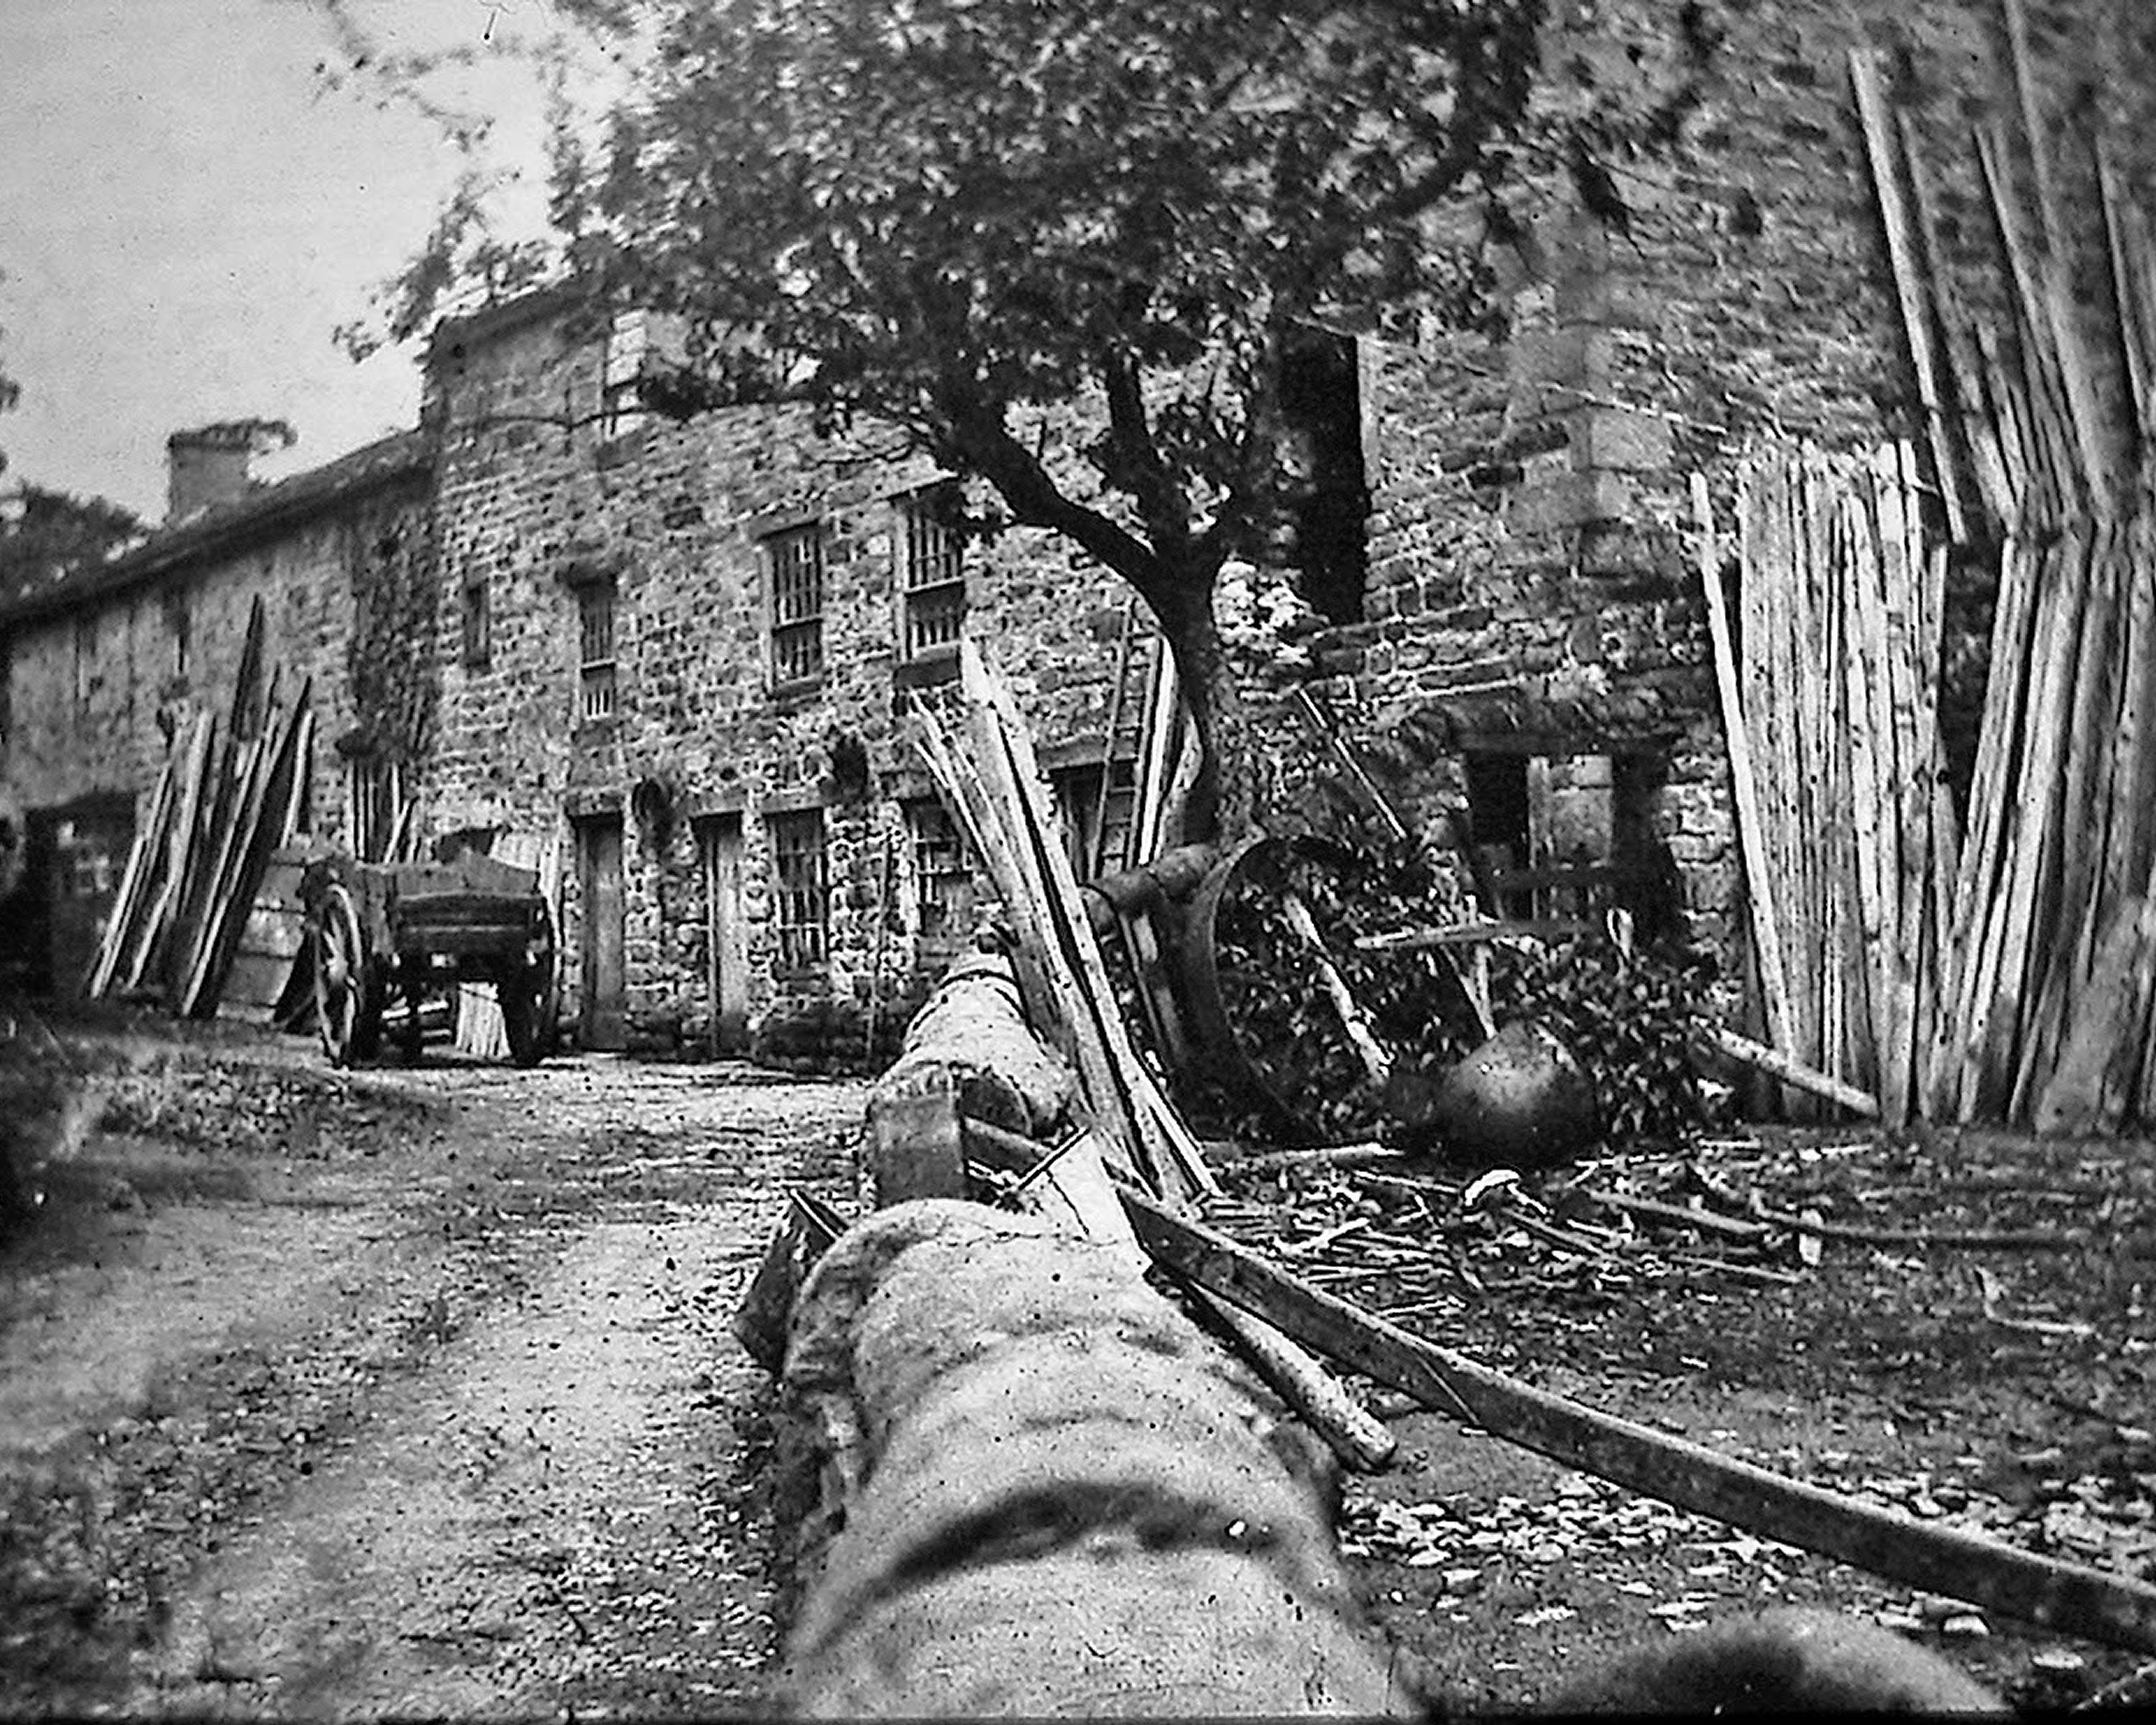 Addingham Sawmill in about 1900